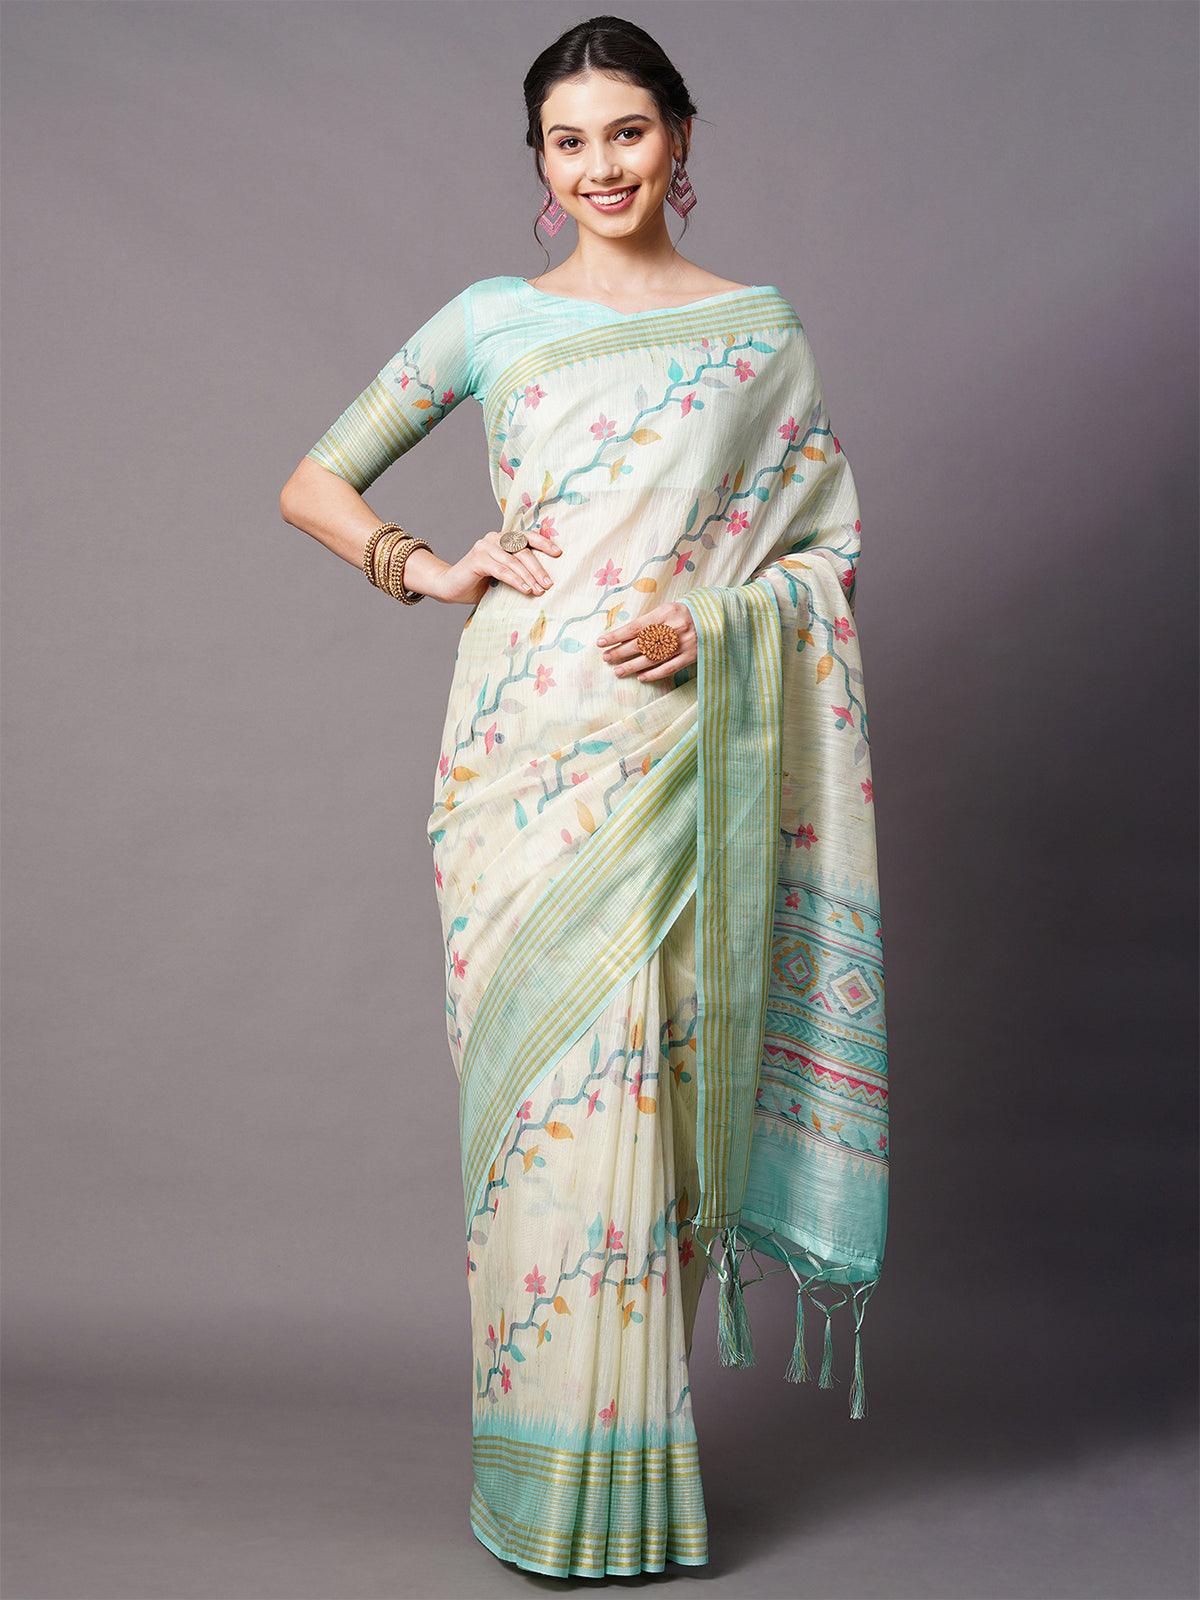 Women's Cream Festive Linen Blend Printed Saree With Unstitched Blouse - Odette